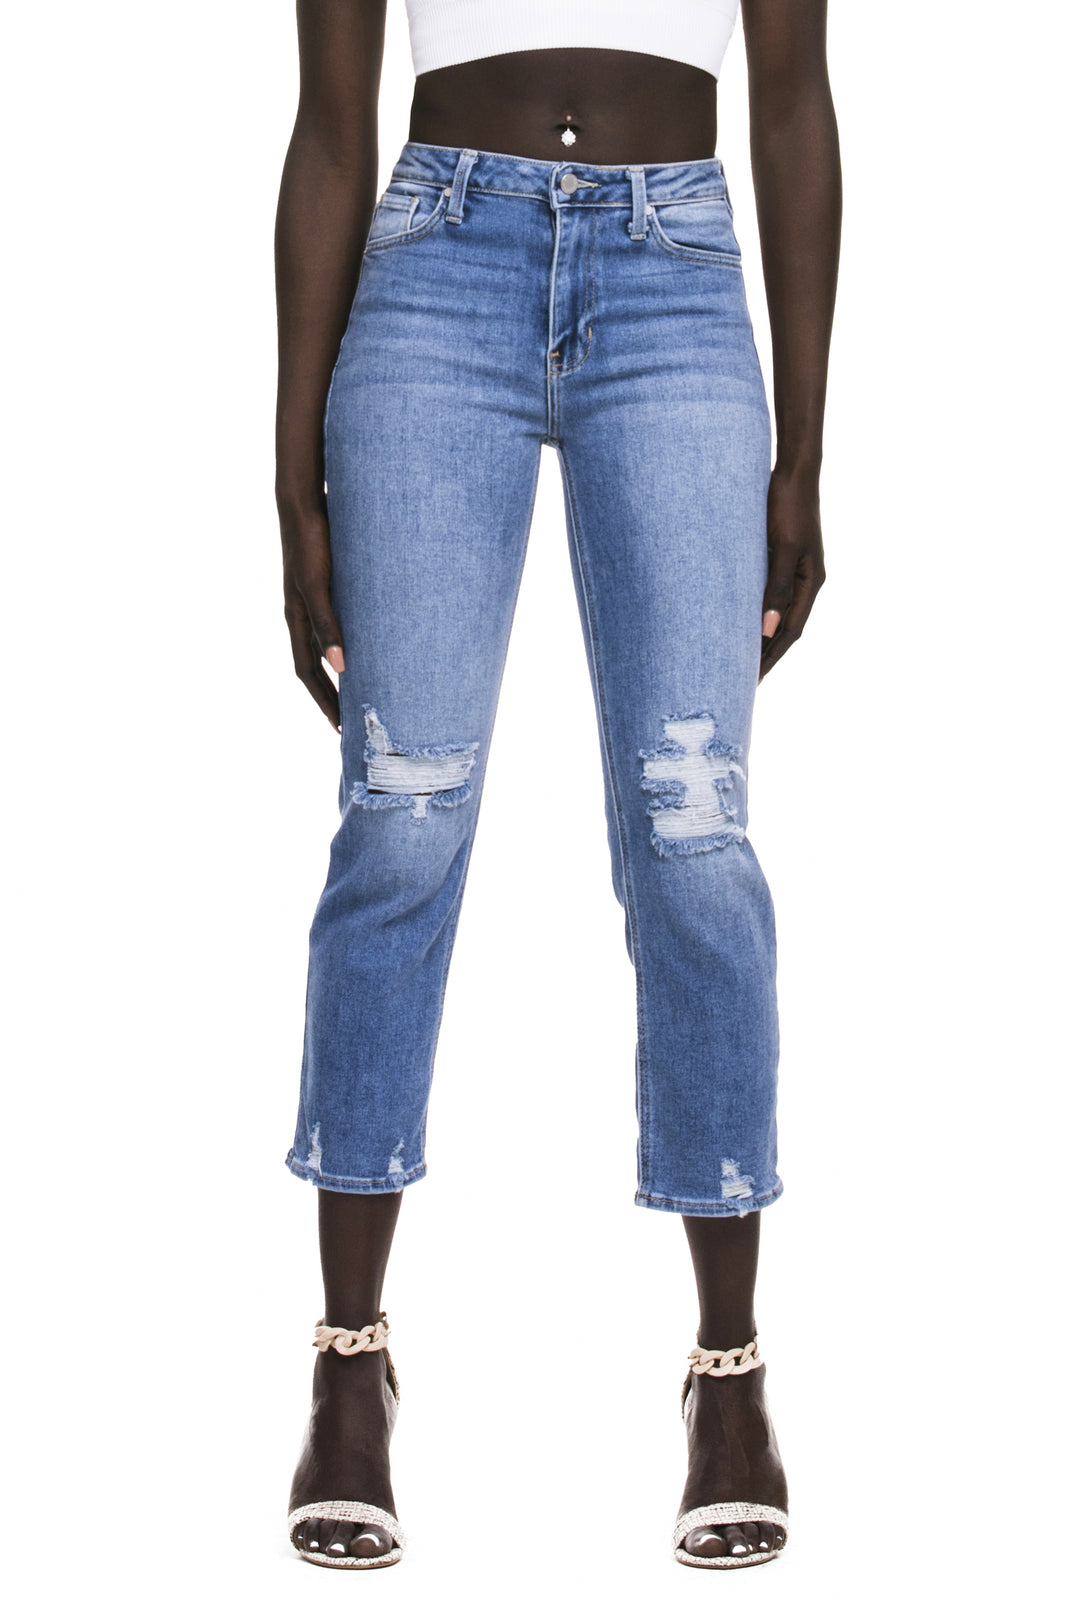 The Official Weekend Jean - High Rise Distressed Straight - Expressive Collective CO.